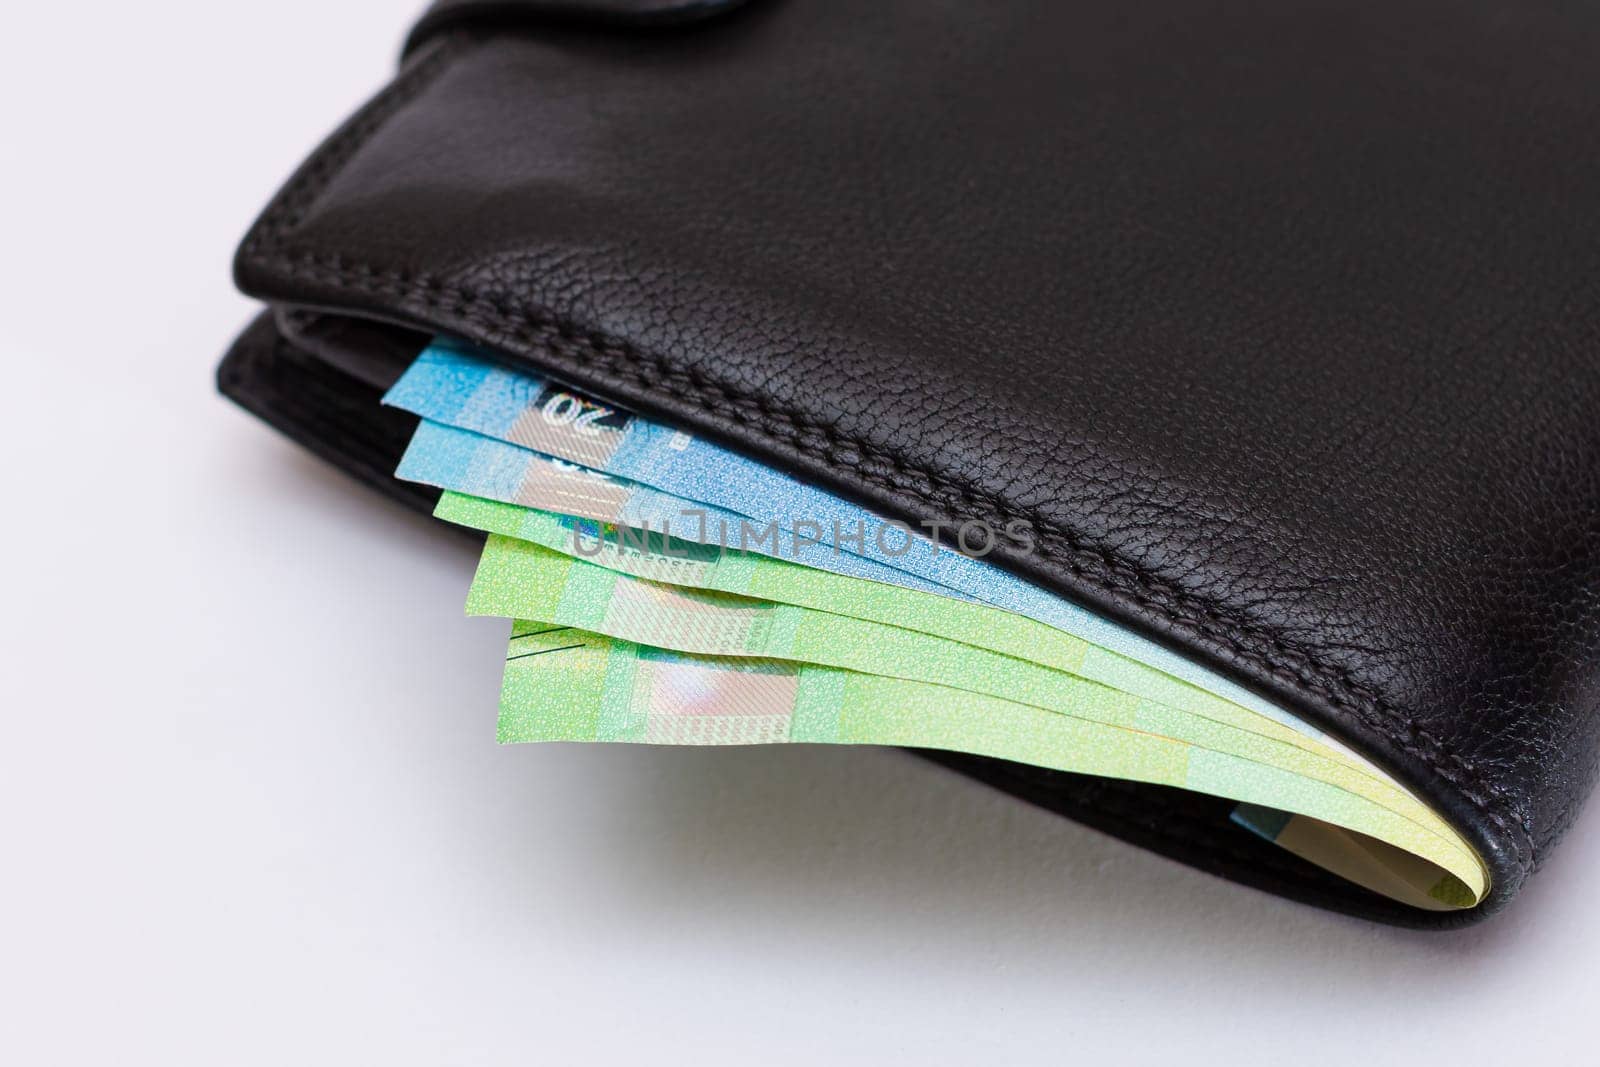 Black Leather Men Wallet with Euro Banknotes Inside on White Background. A Purse Full of Money Symbolizing Wealth, Success and Social Status